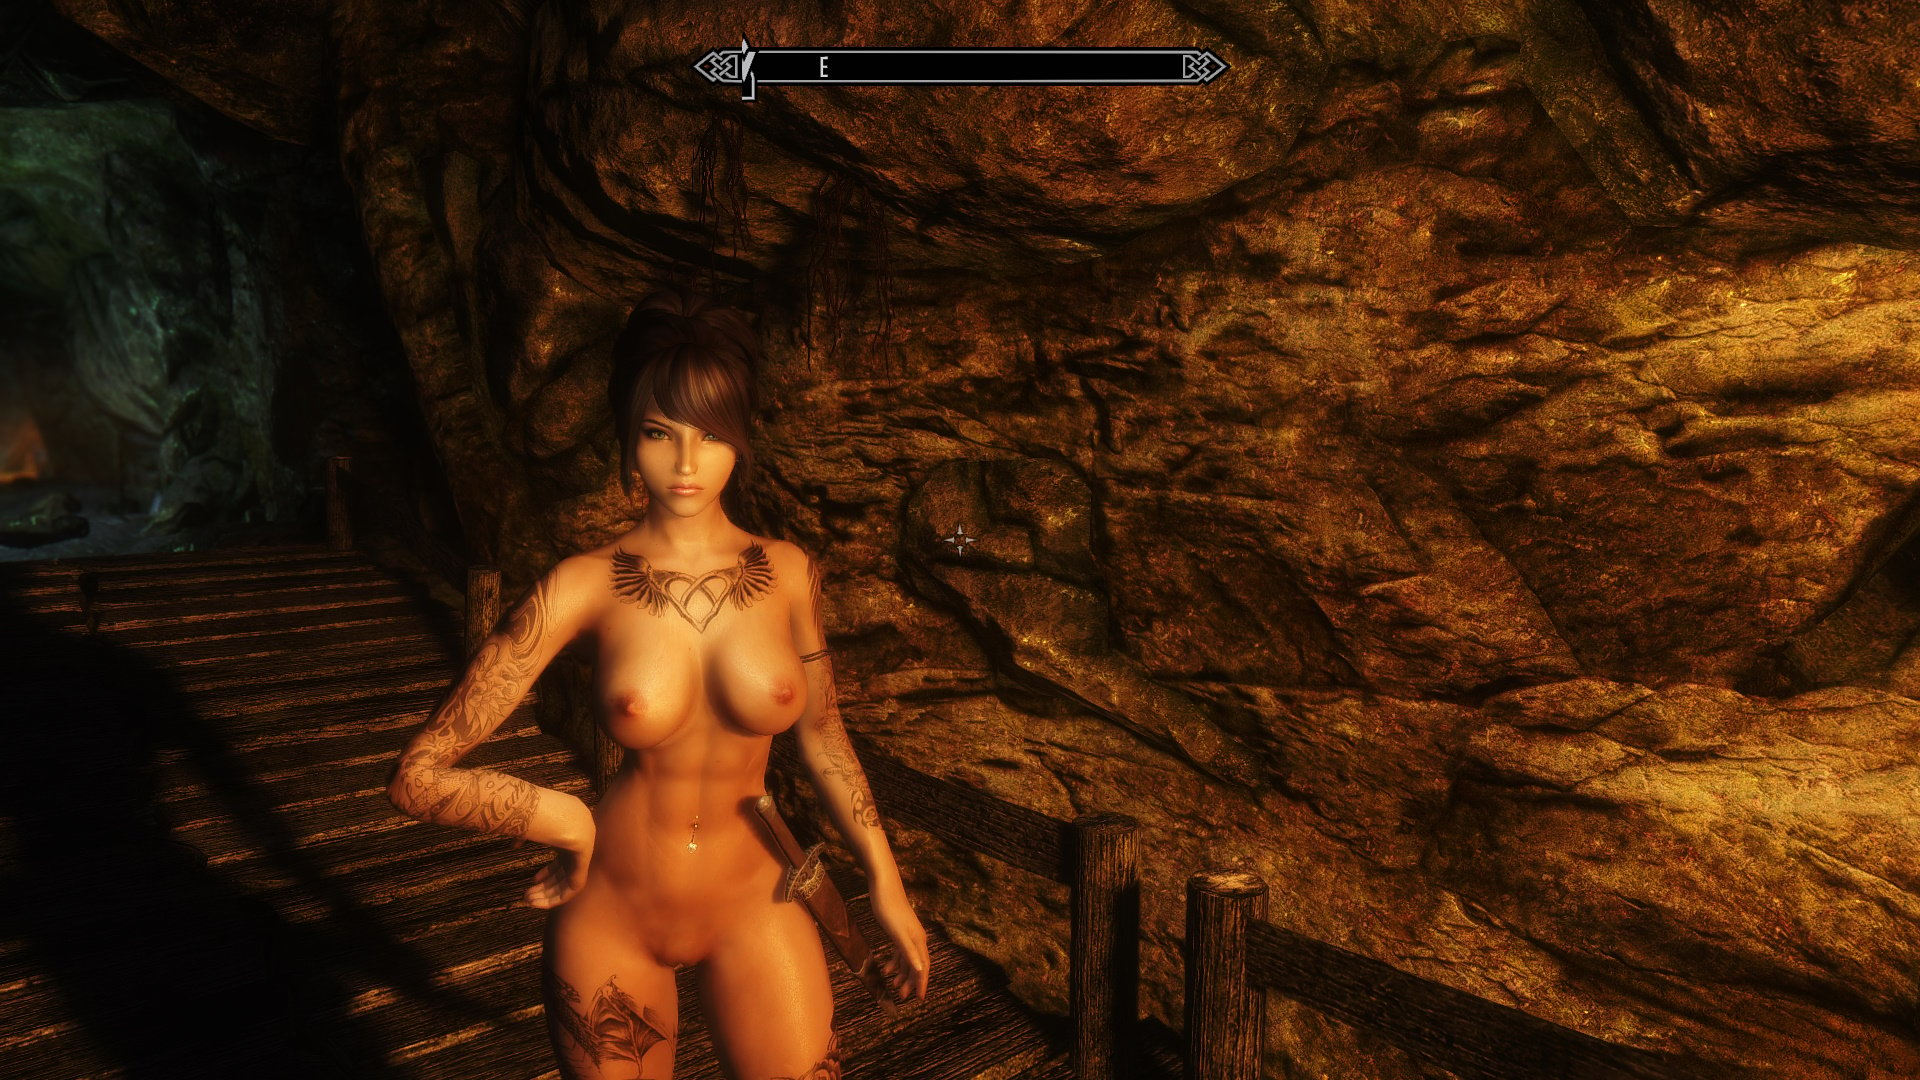 Just recently got back into skyrim and created Danni. 